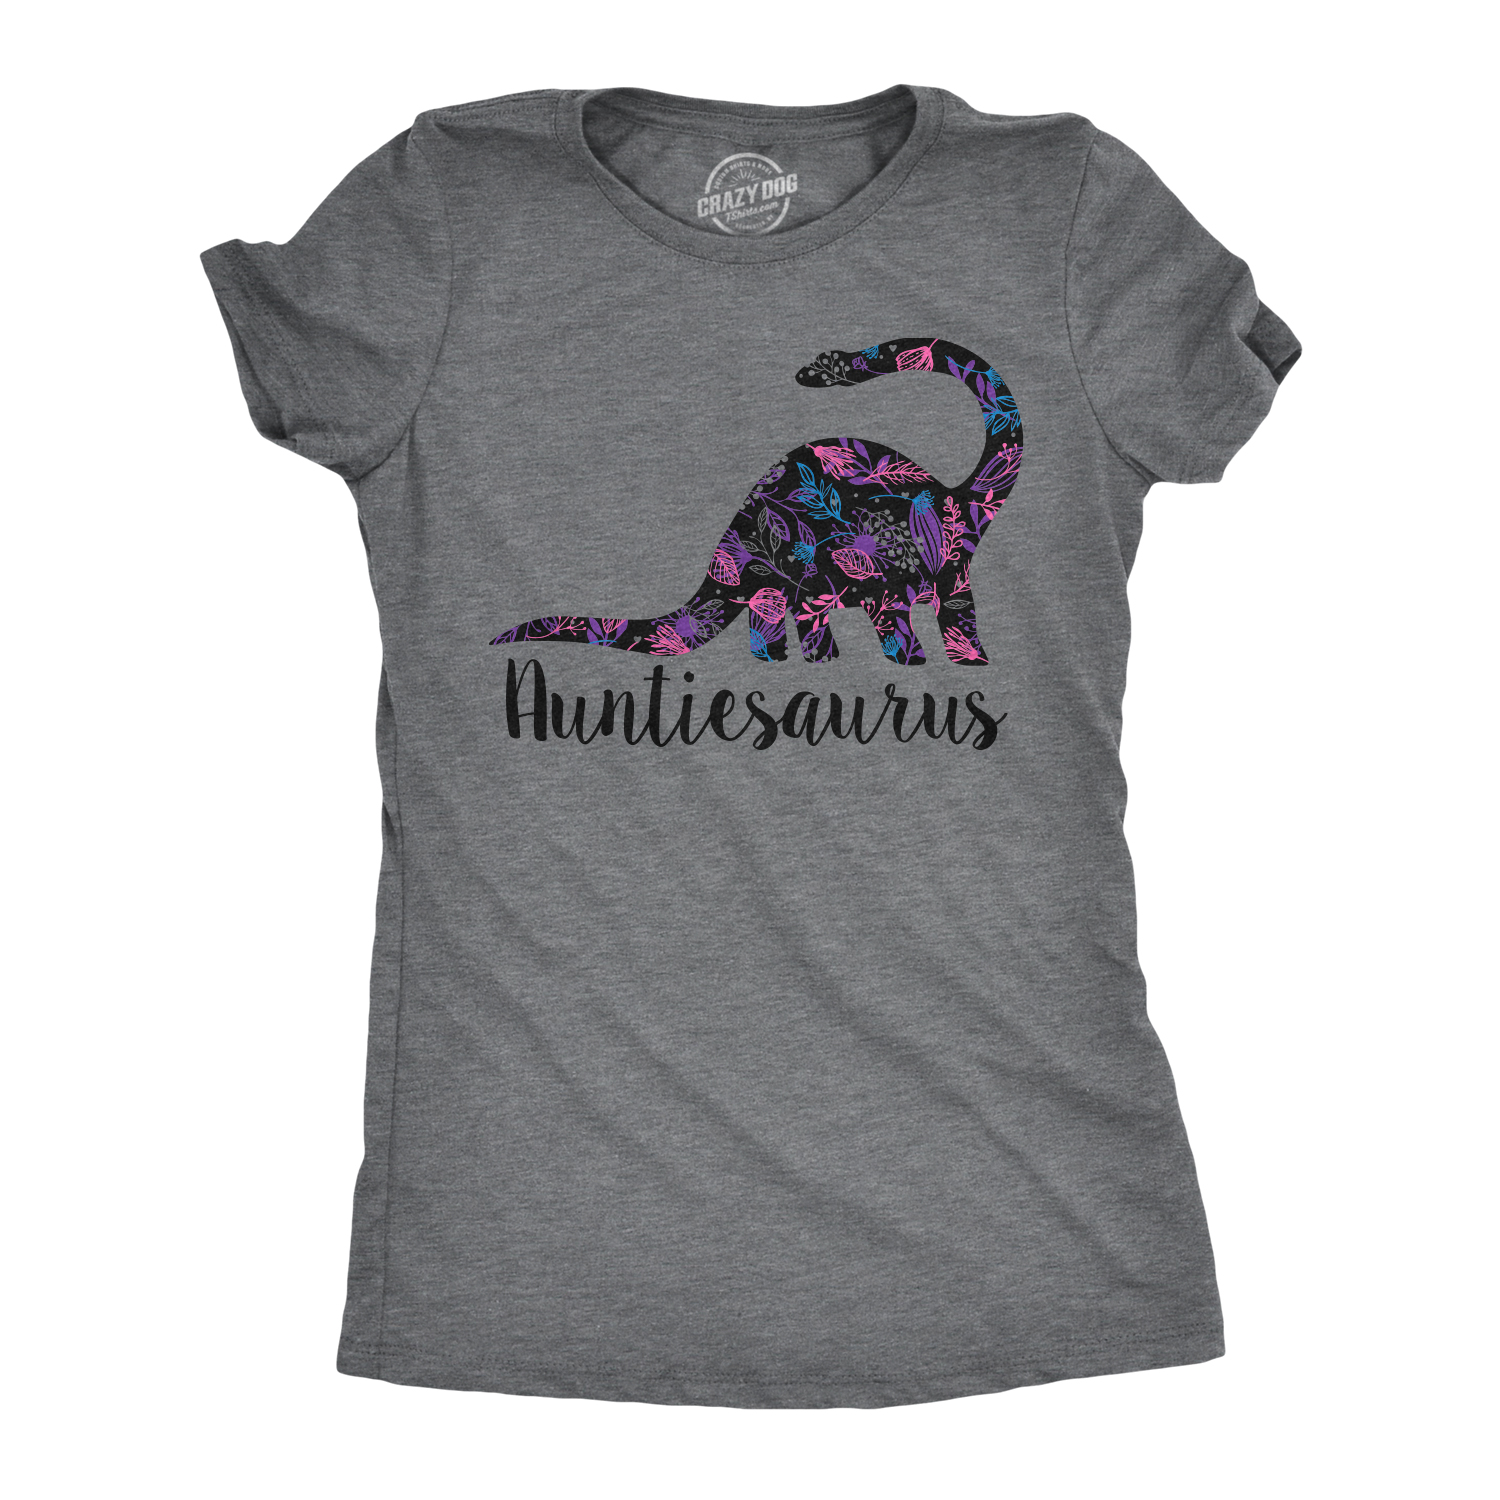 Womens Auntiesaurus T Shirt Funny Kids Gift for Aunt Cute Graphic Dinosaur Top Womens Graphic Tees - image 1 of 10